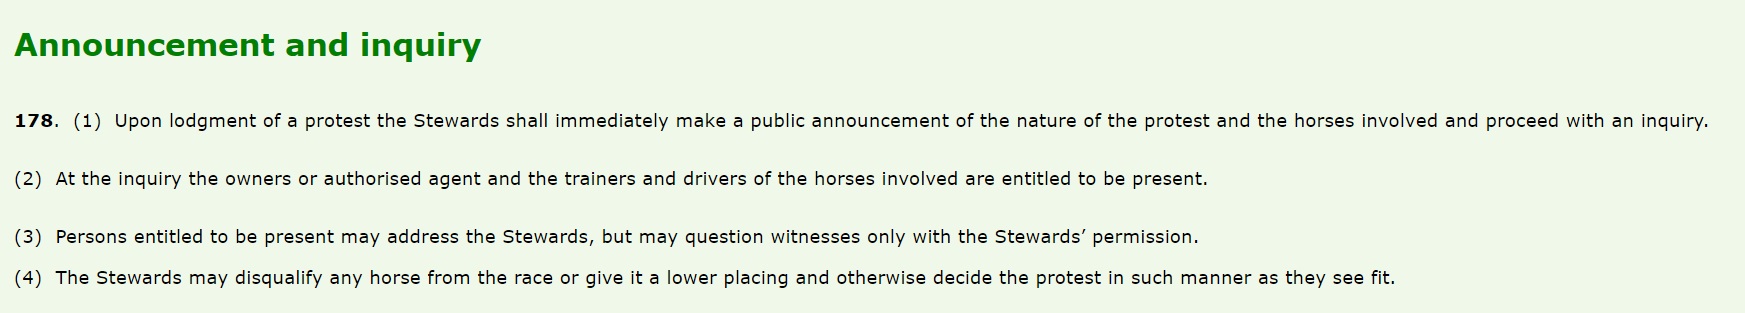 What Was the CEO Doing in the Stewards Room During The Protest Hearing?